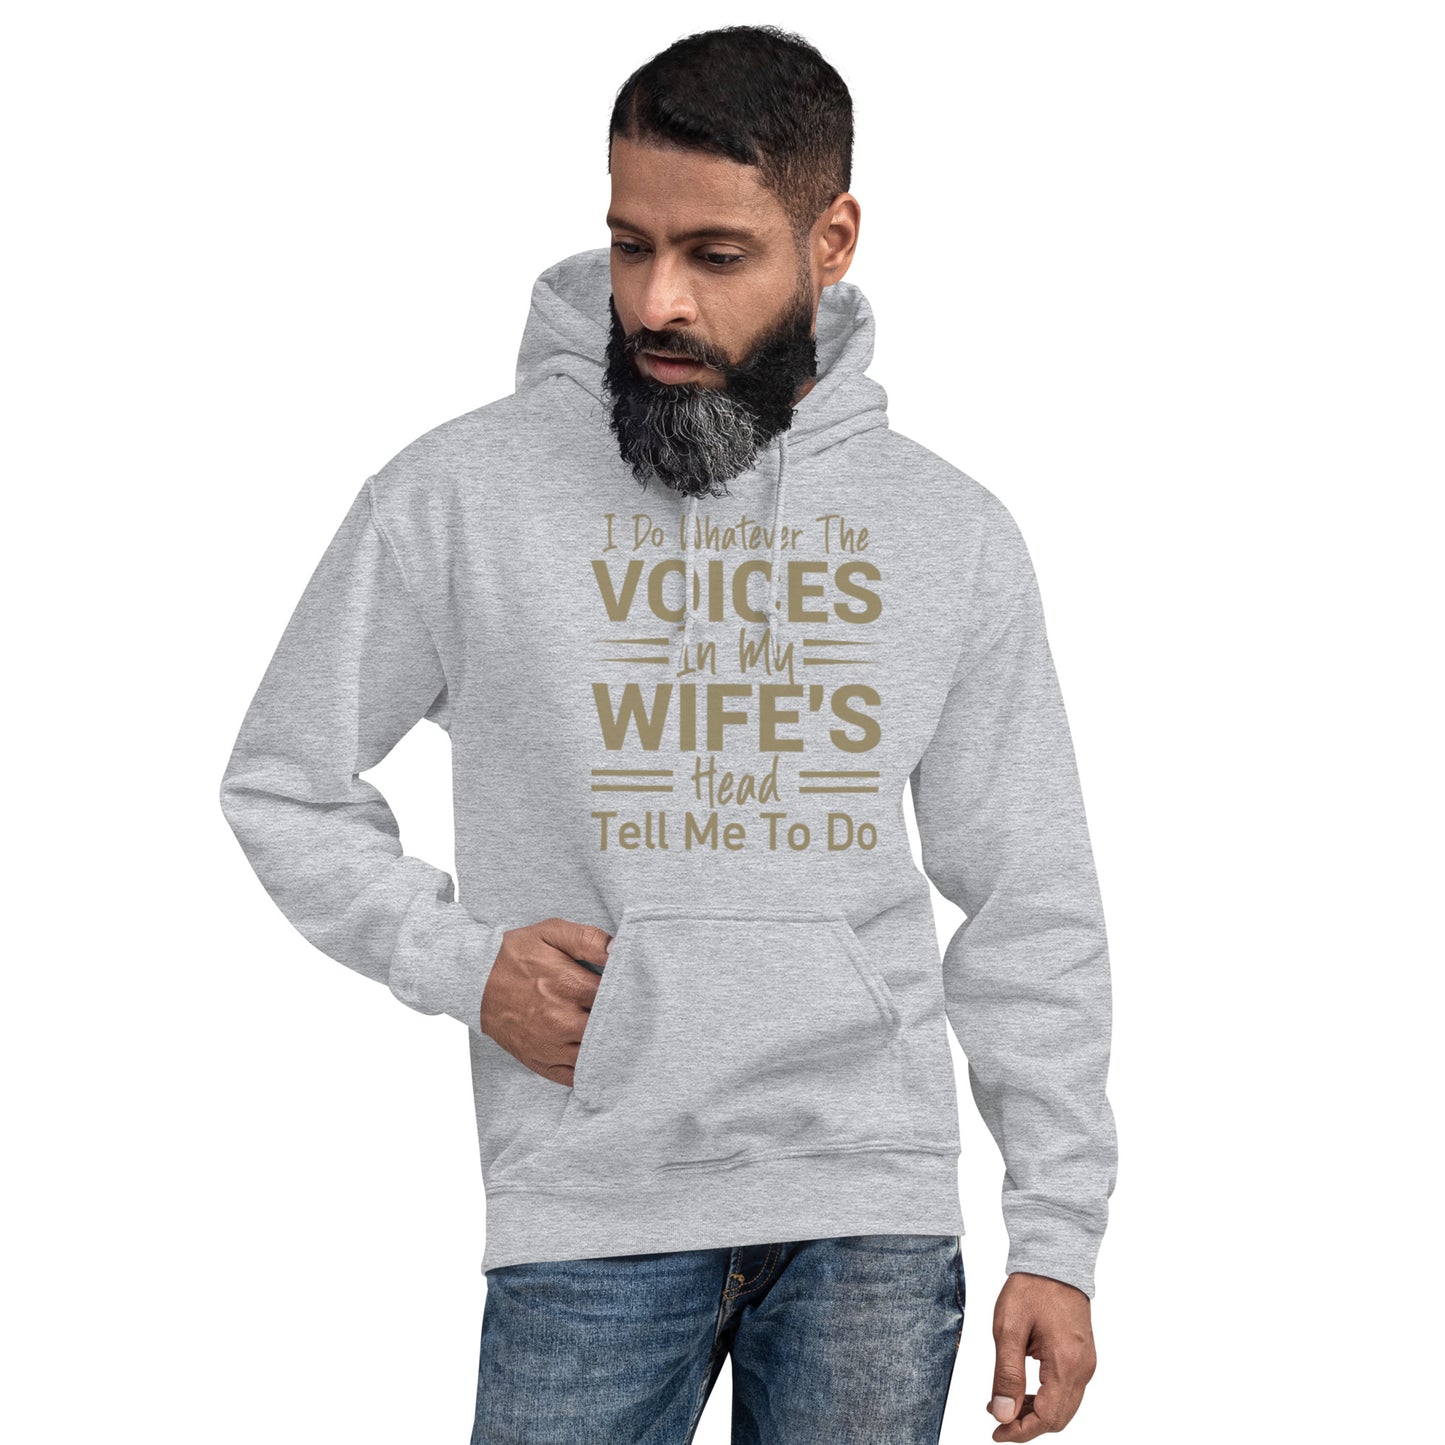 I Do Whatever The Voices In My Wife's Head Tell Me To Do Unisex Hoodie